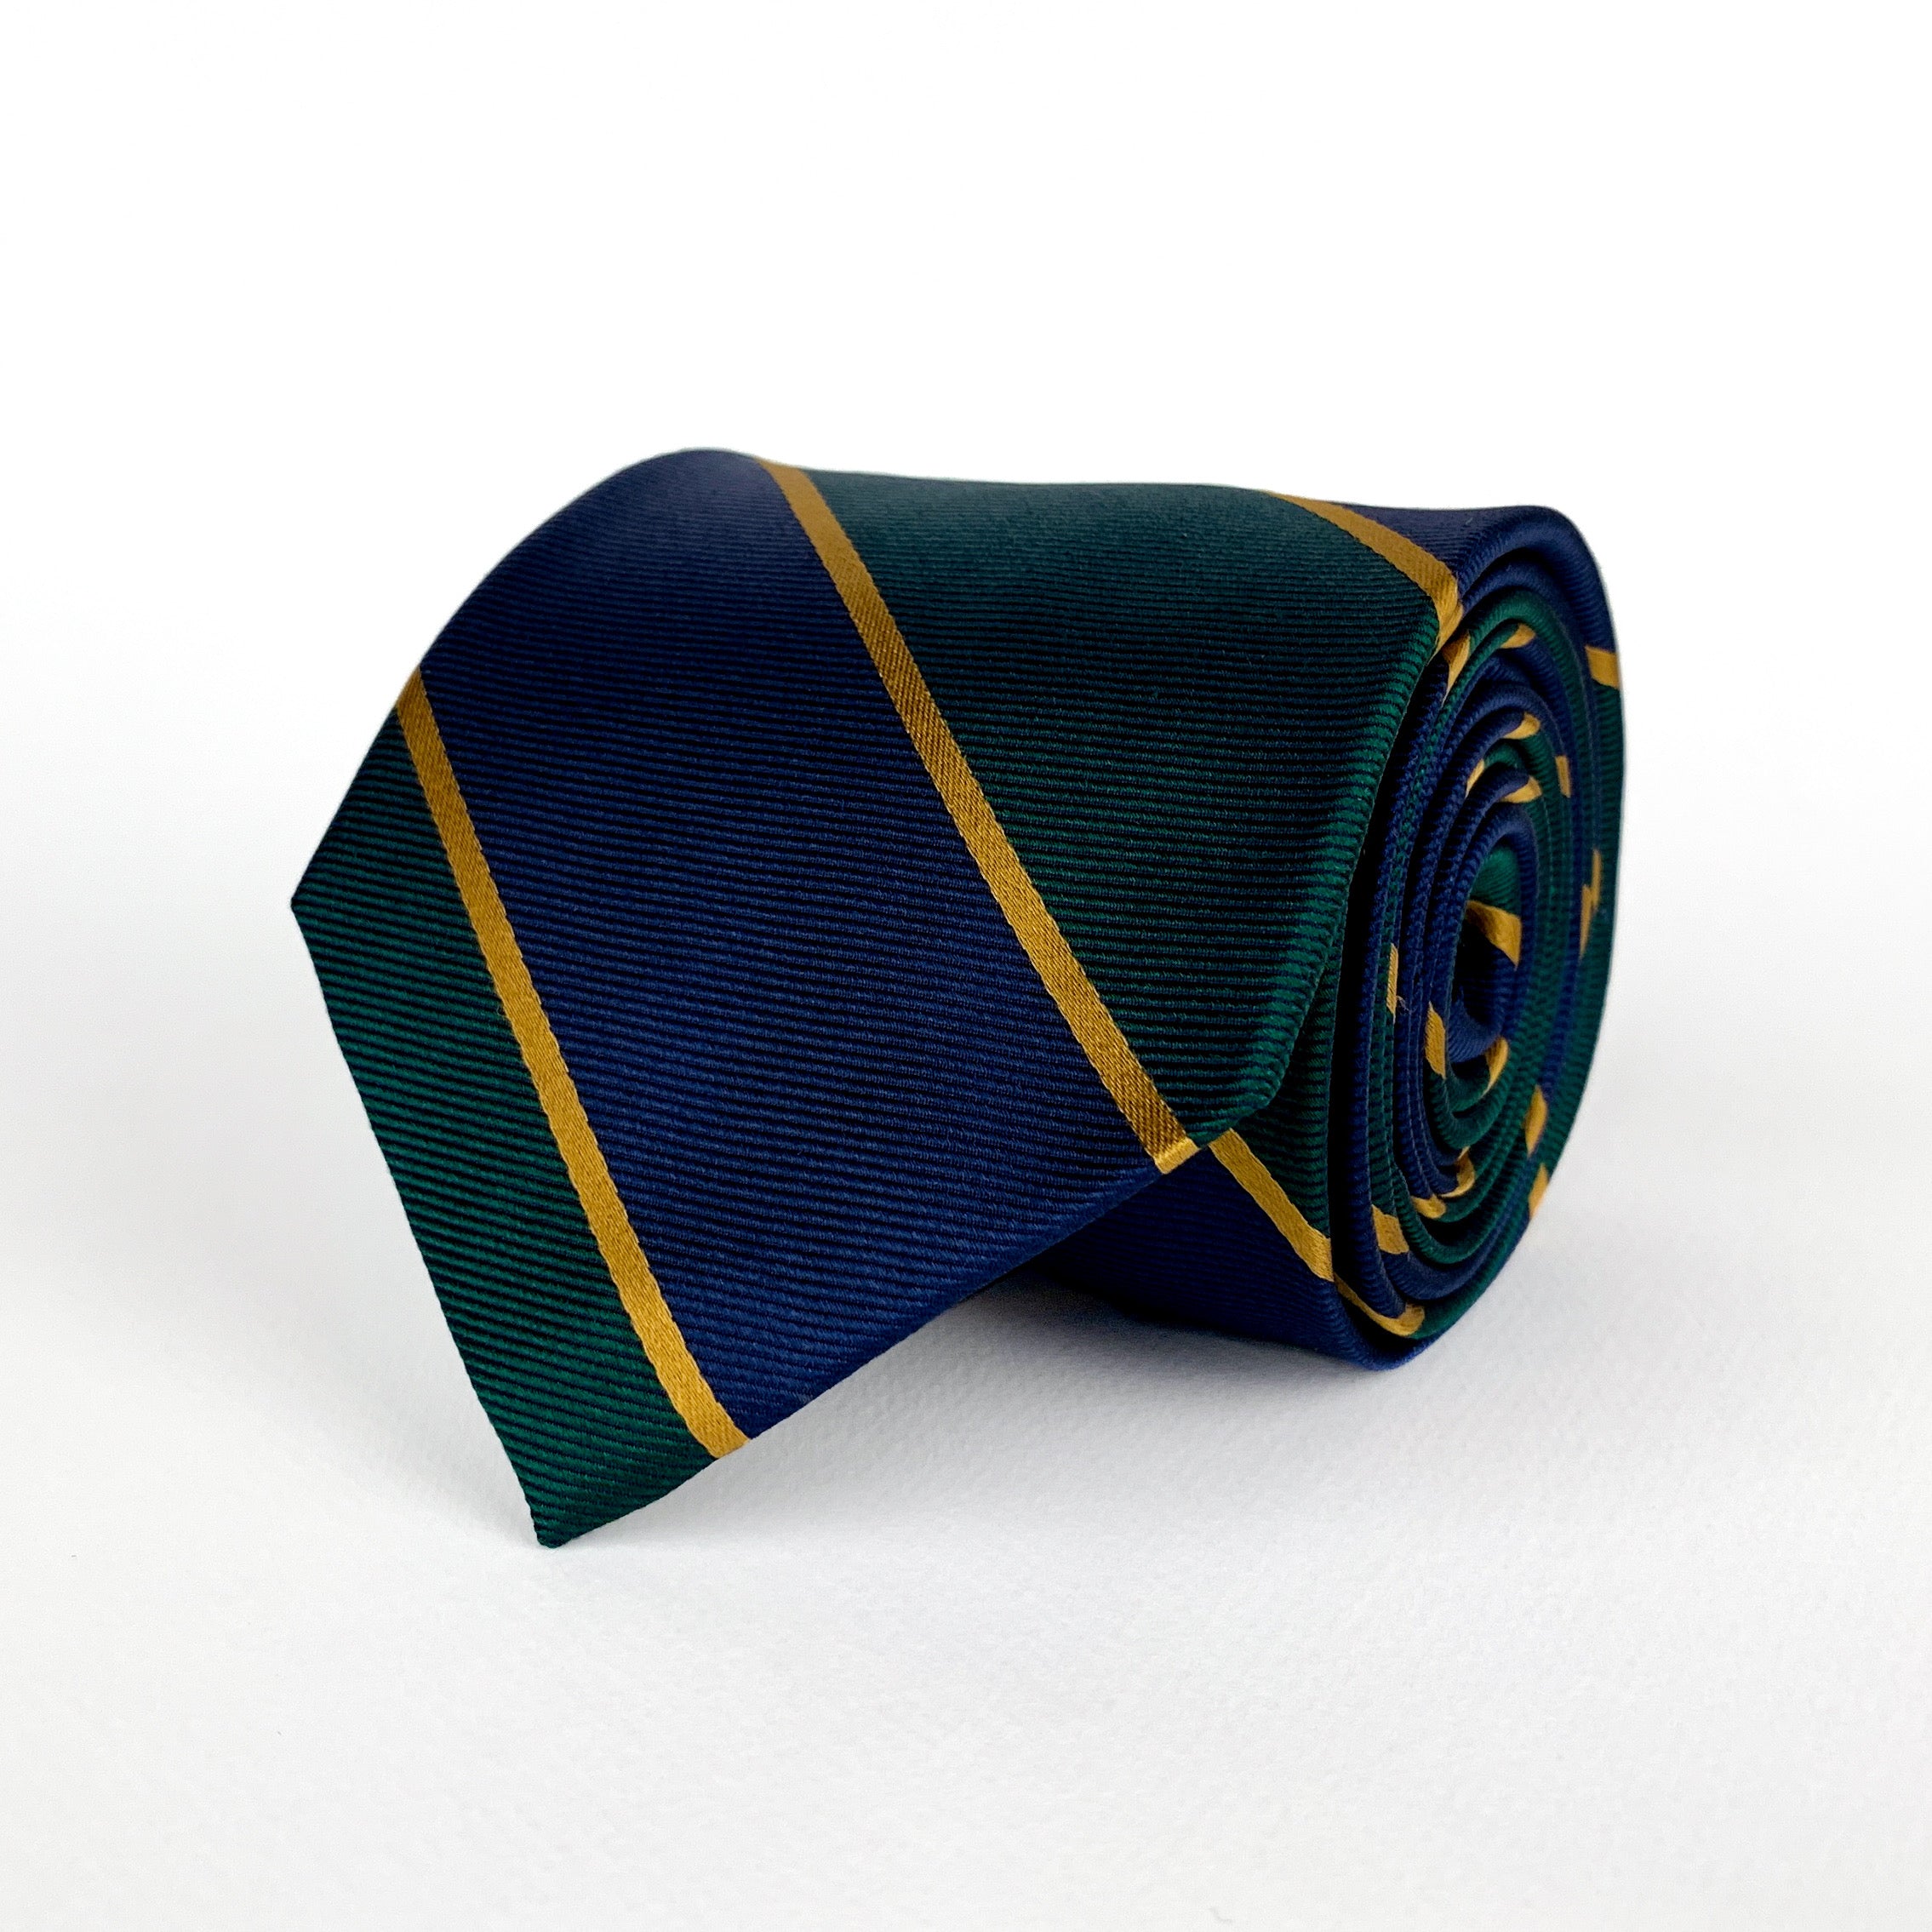 Mulberry silk twill tie with navy blue and dark emerald green regimental stripes and gold woven detailing rolled and placed on a white surface